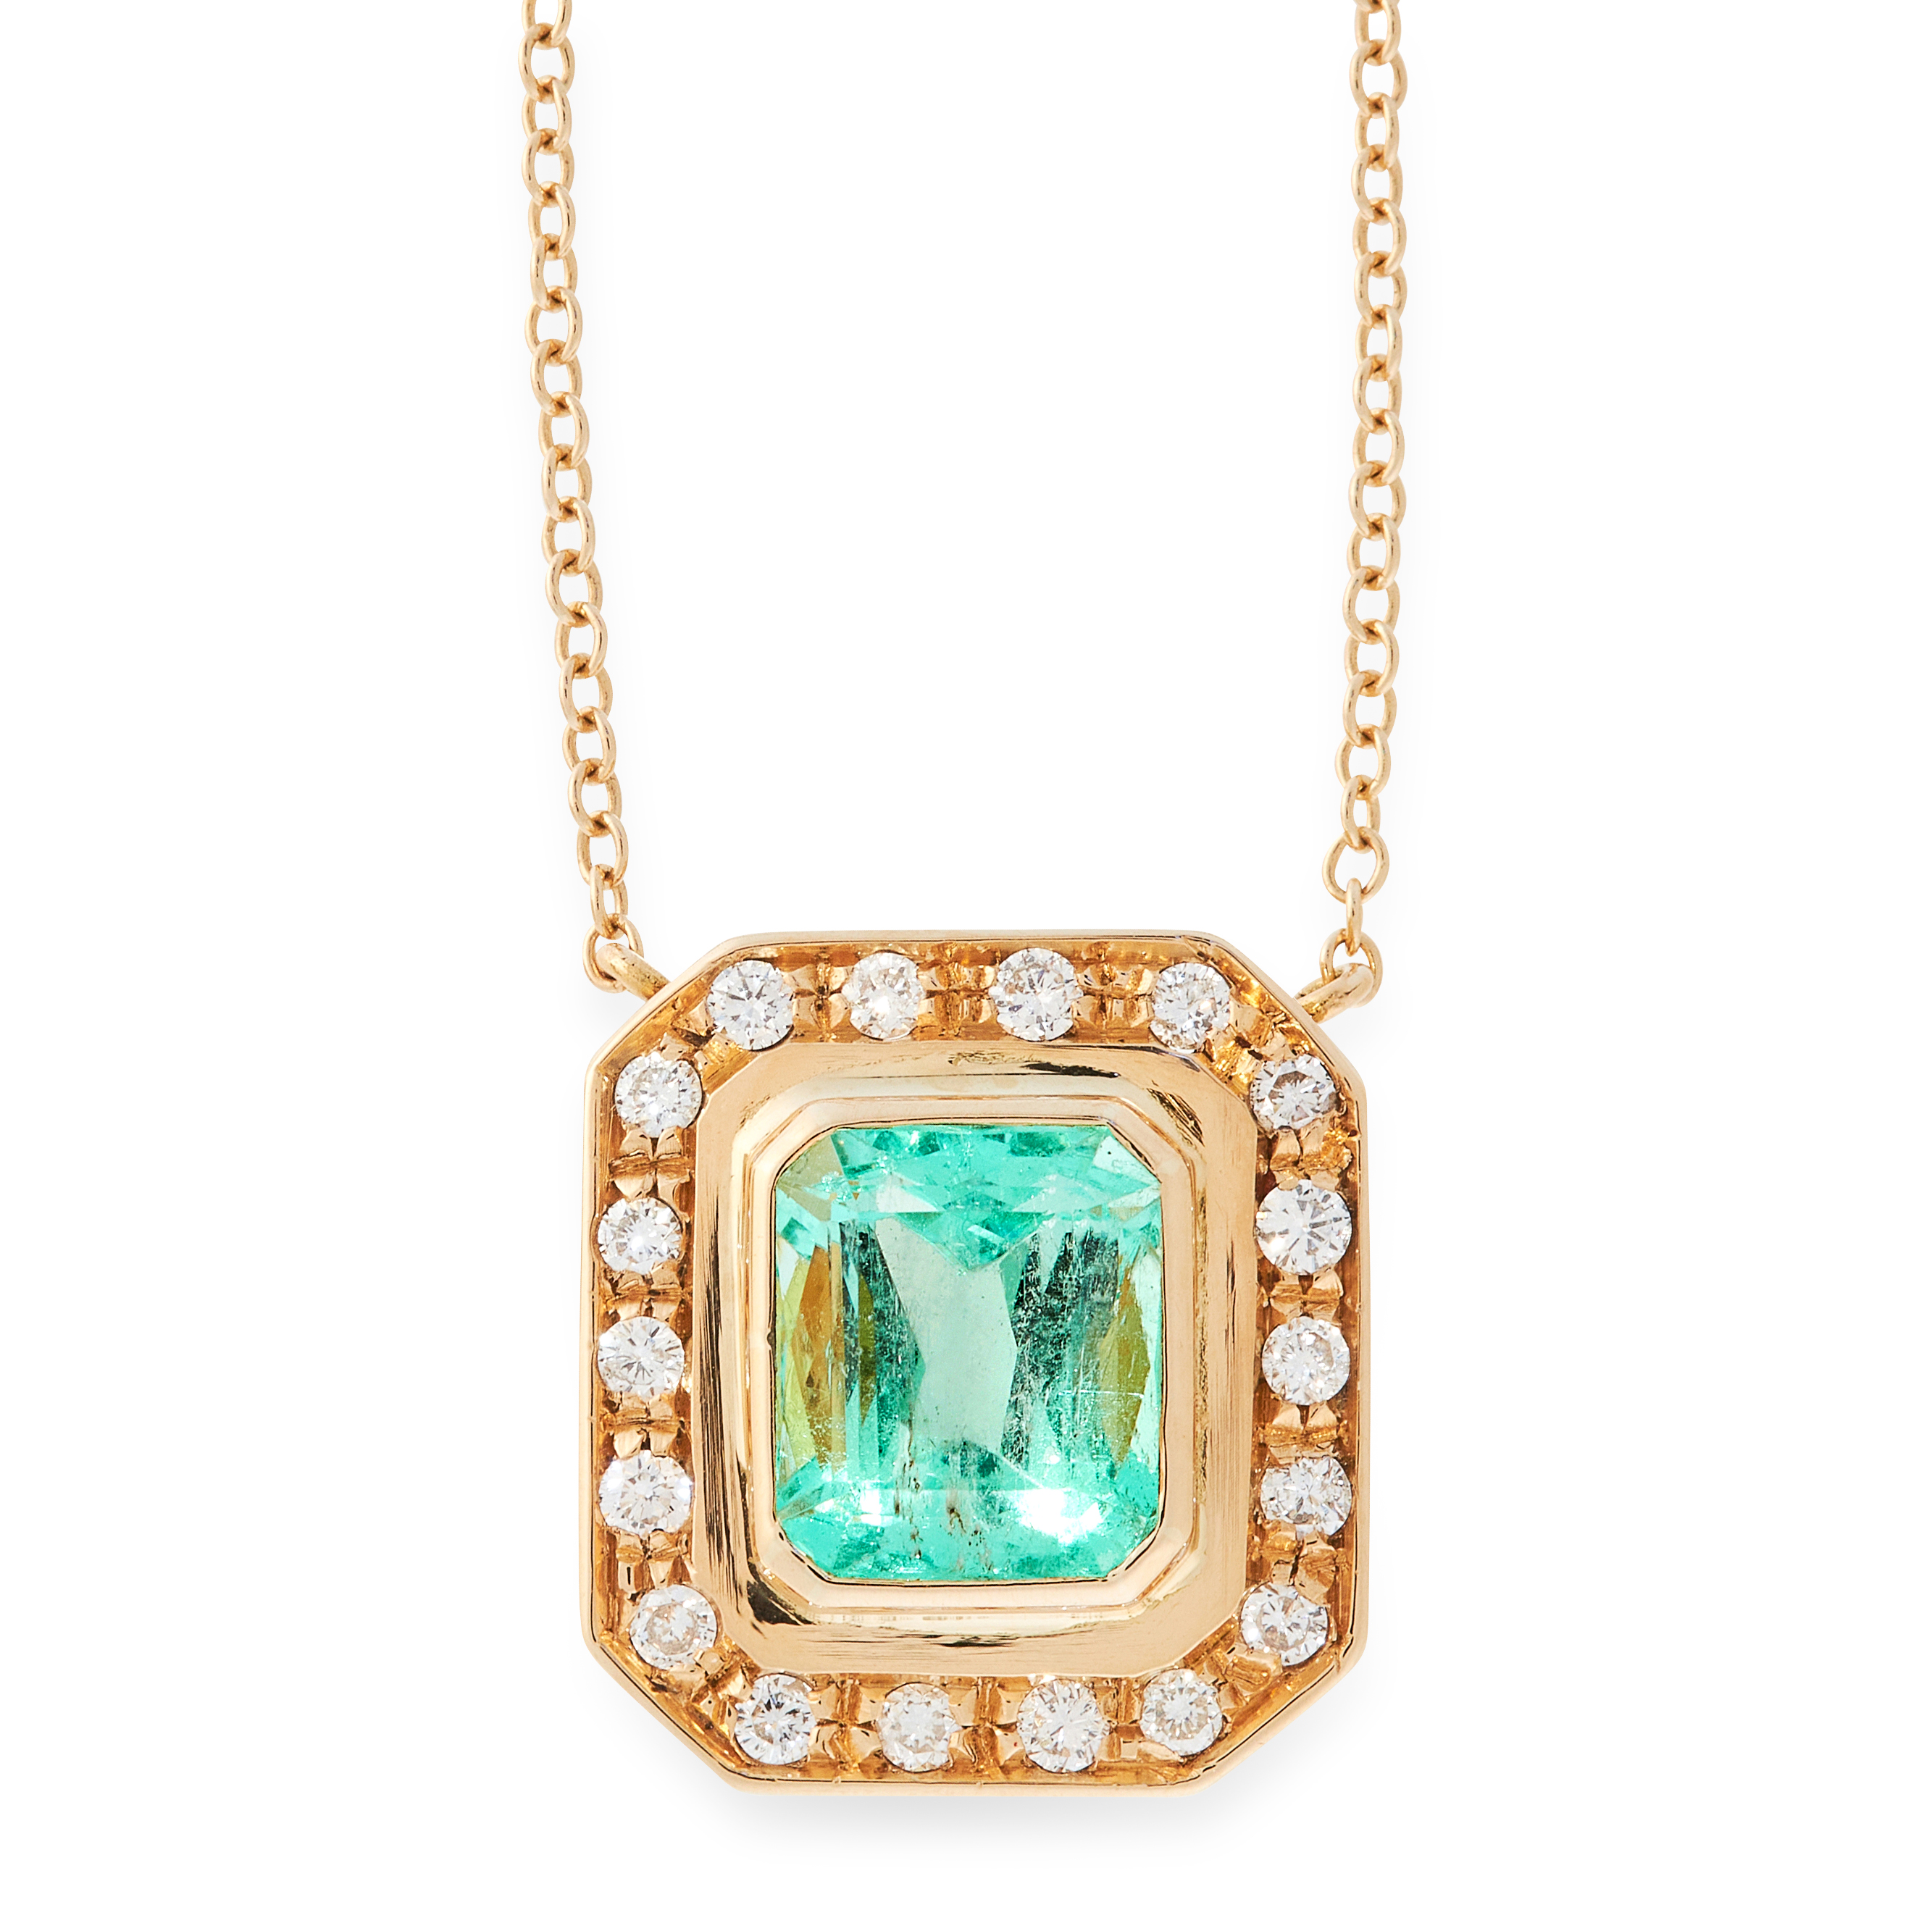 AN EMERALD AND DIAMOND PENDANT NECKLACE in 18ct yellow gold, set with an emerald cut emerald of 4.00